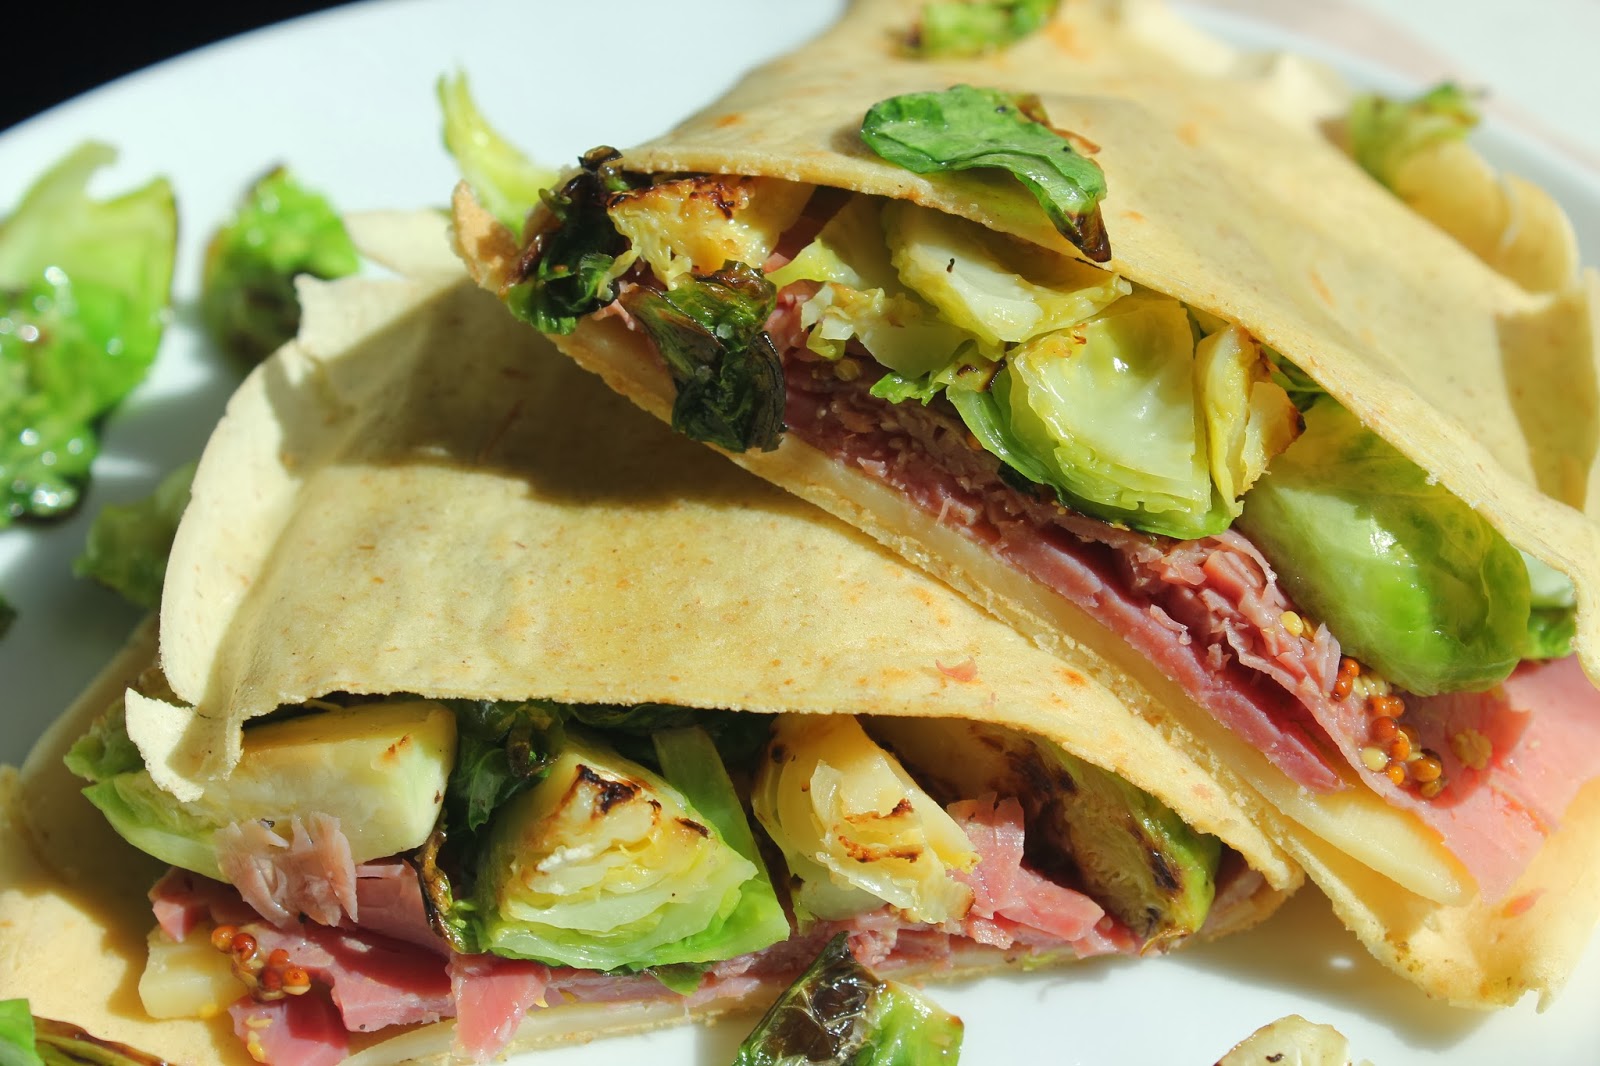 Corned beef on rye crepes with brussels sprouts